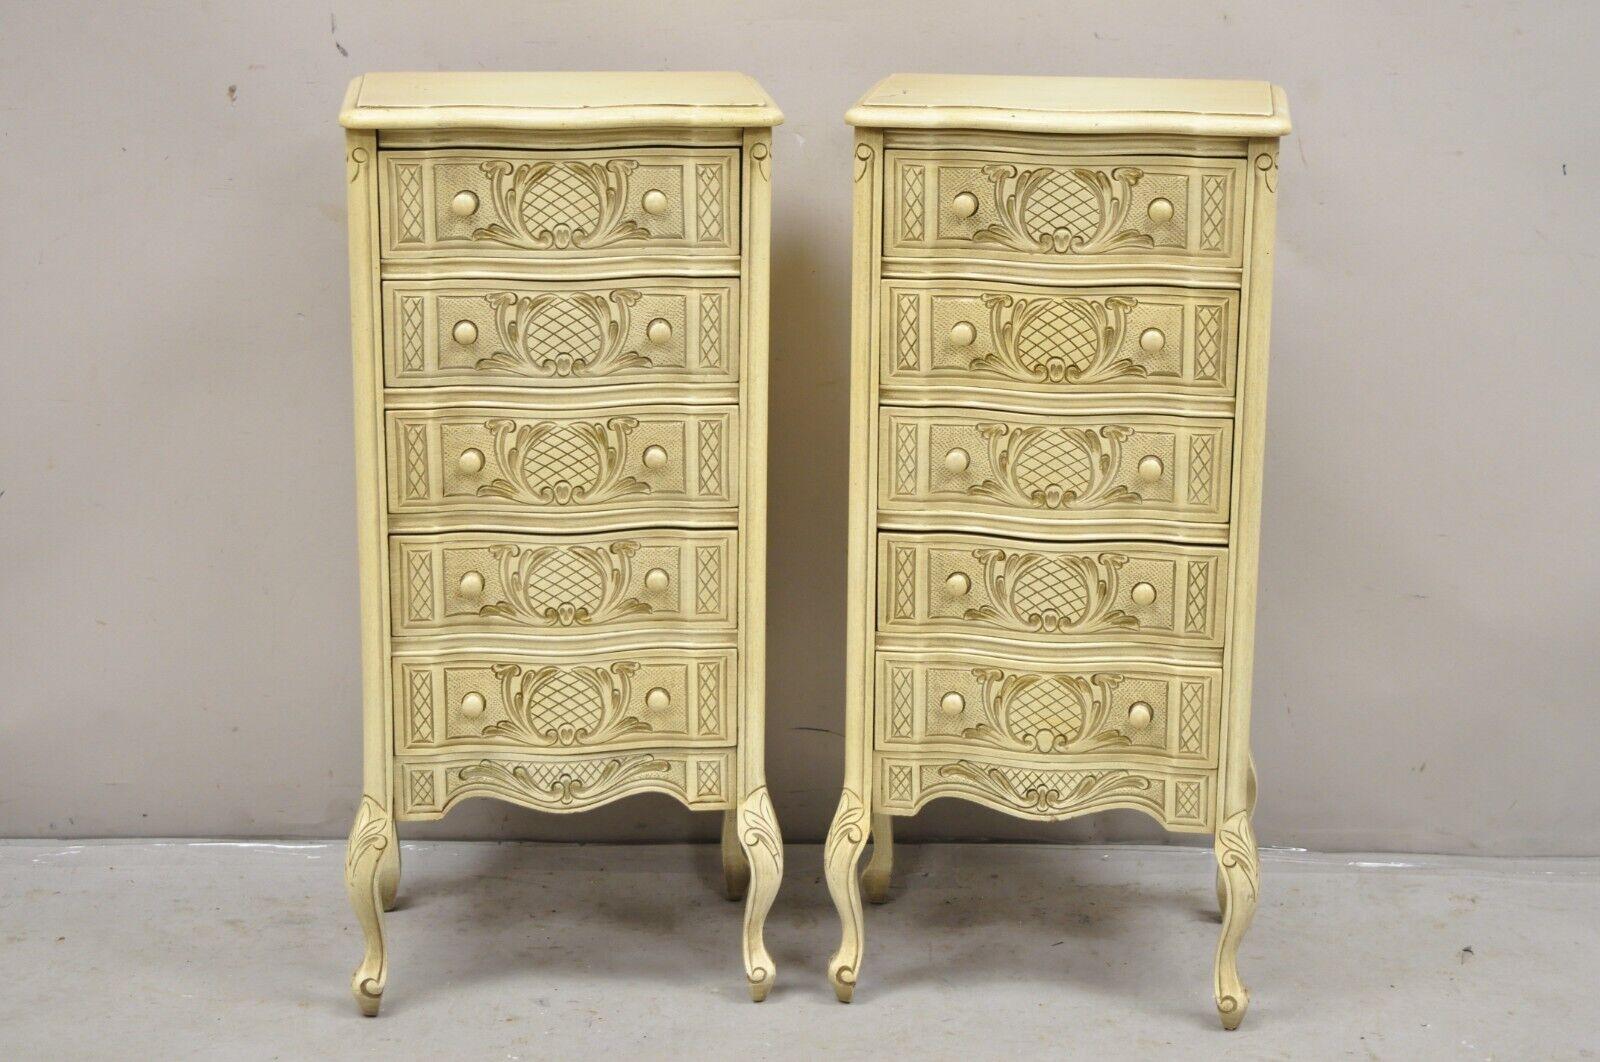 Pair of Vintage French Country Provincial Style Cream Painted 5 Drawer Chest Nightstands. Item features nicely carved details, cream painted finish, serpentine fronts, very nice vintage pair. Circa Mid 20th Century. Measurements: 35